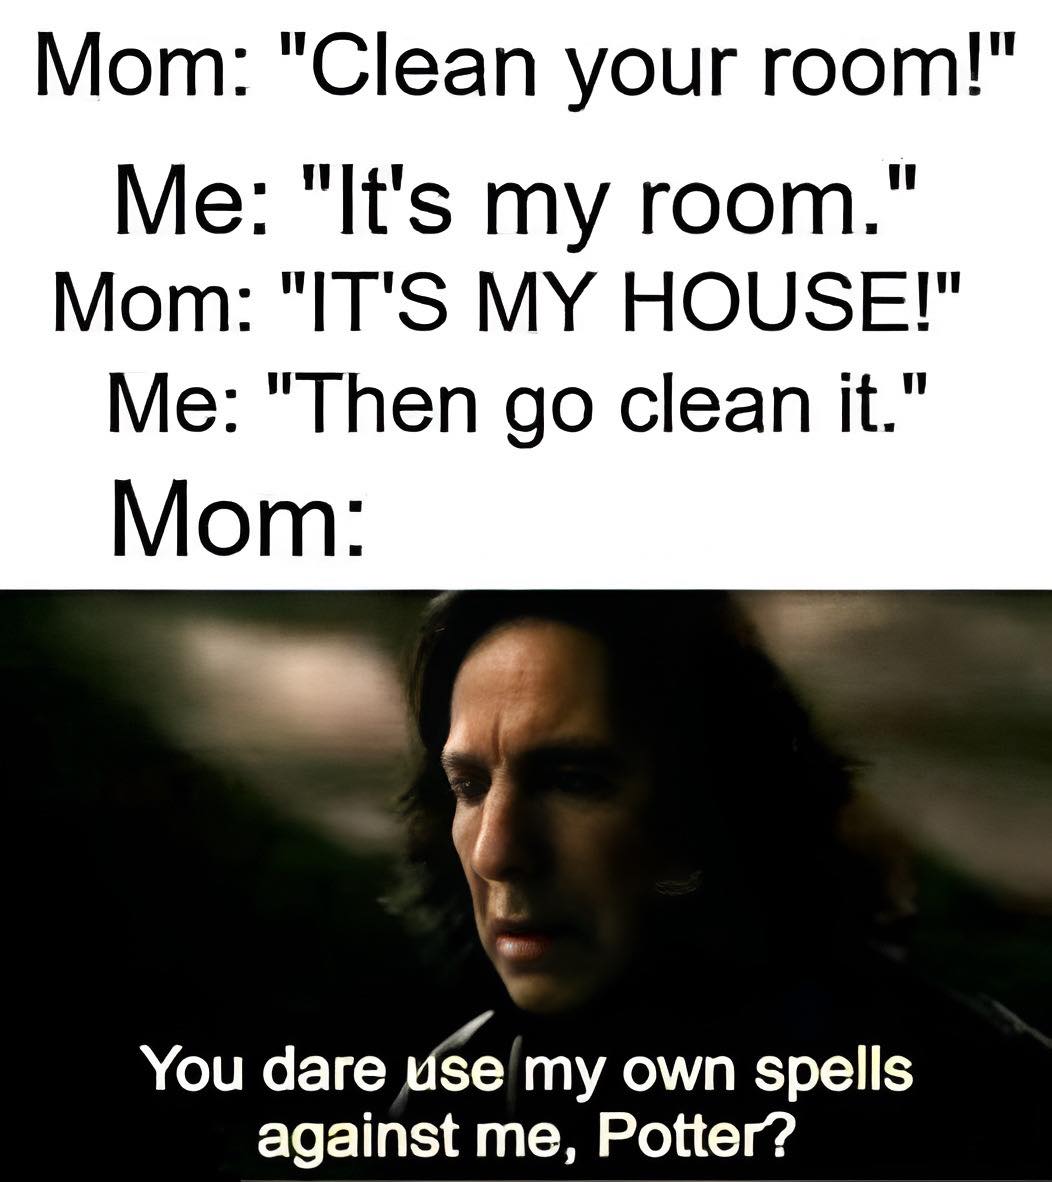 A Collection of Harry Potter memes (Clean of course) No. 1